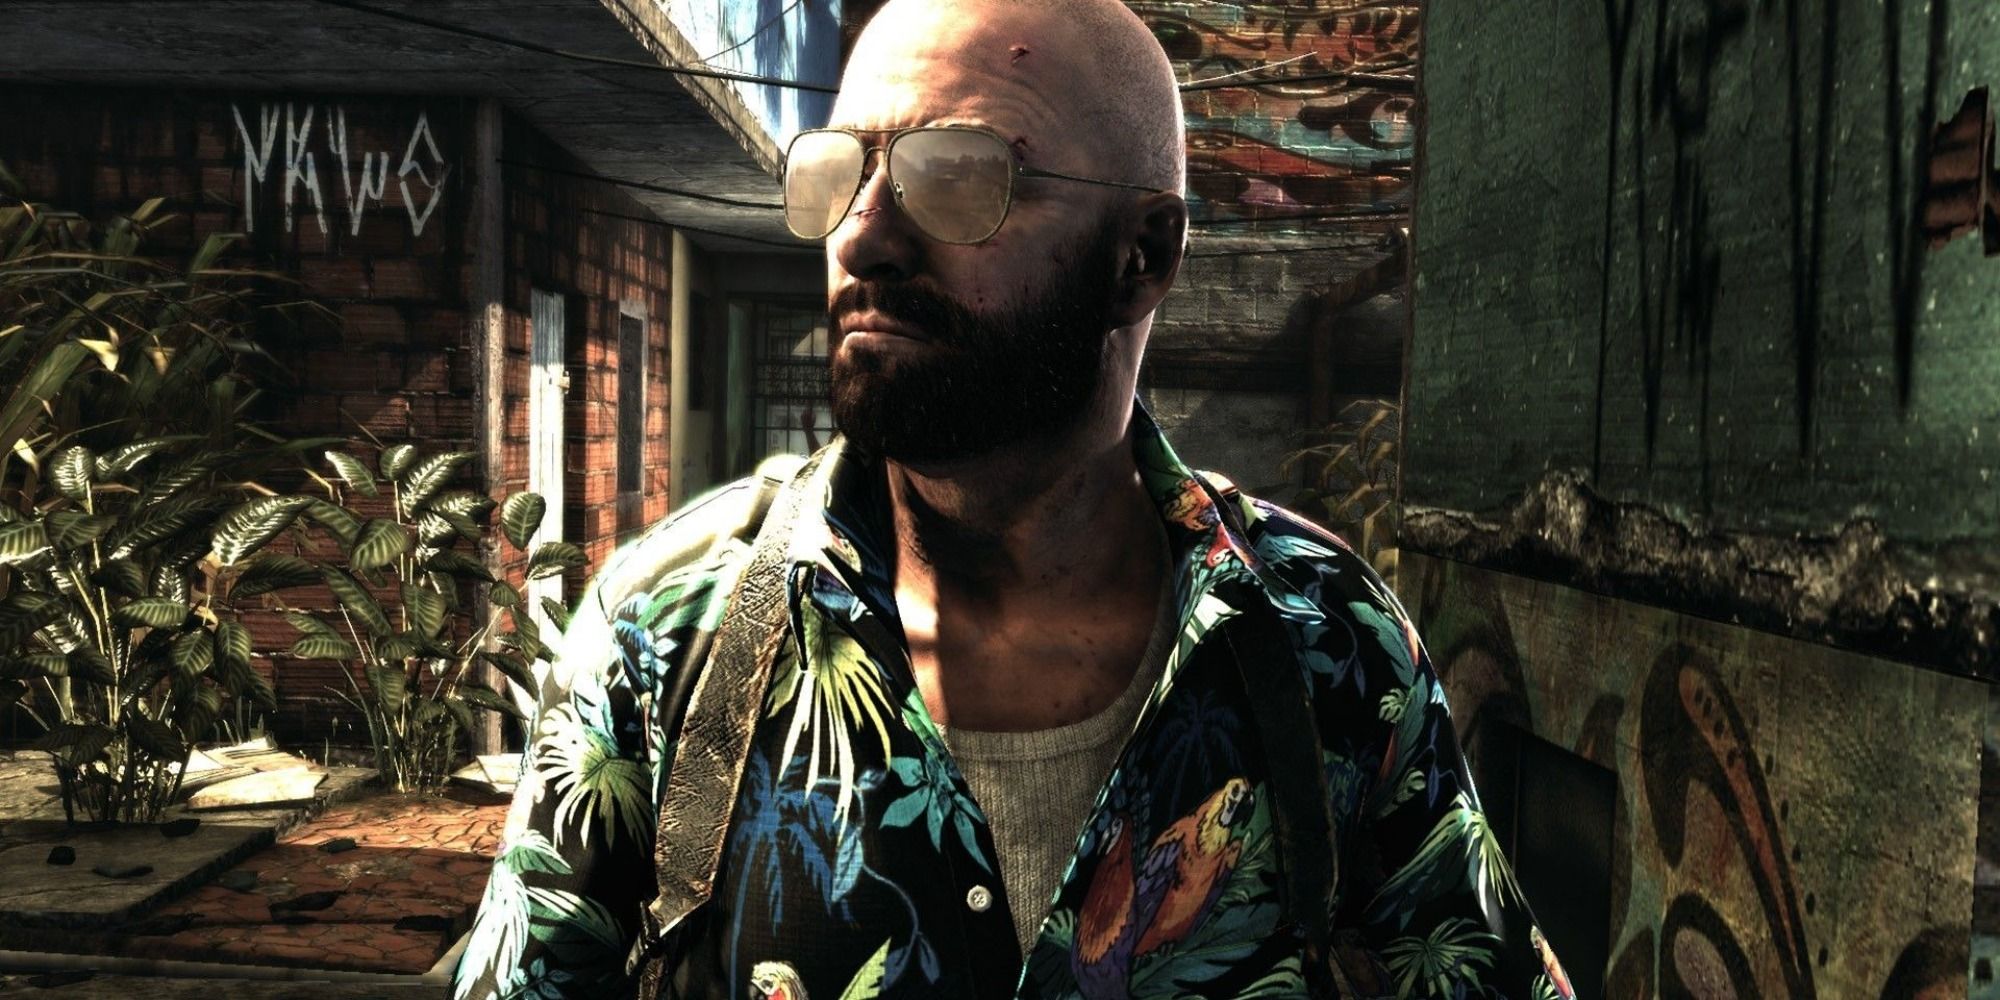 Max Payne 3 once had a co-op prologue story for two players